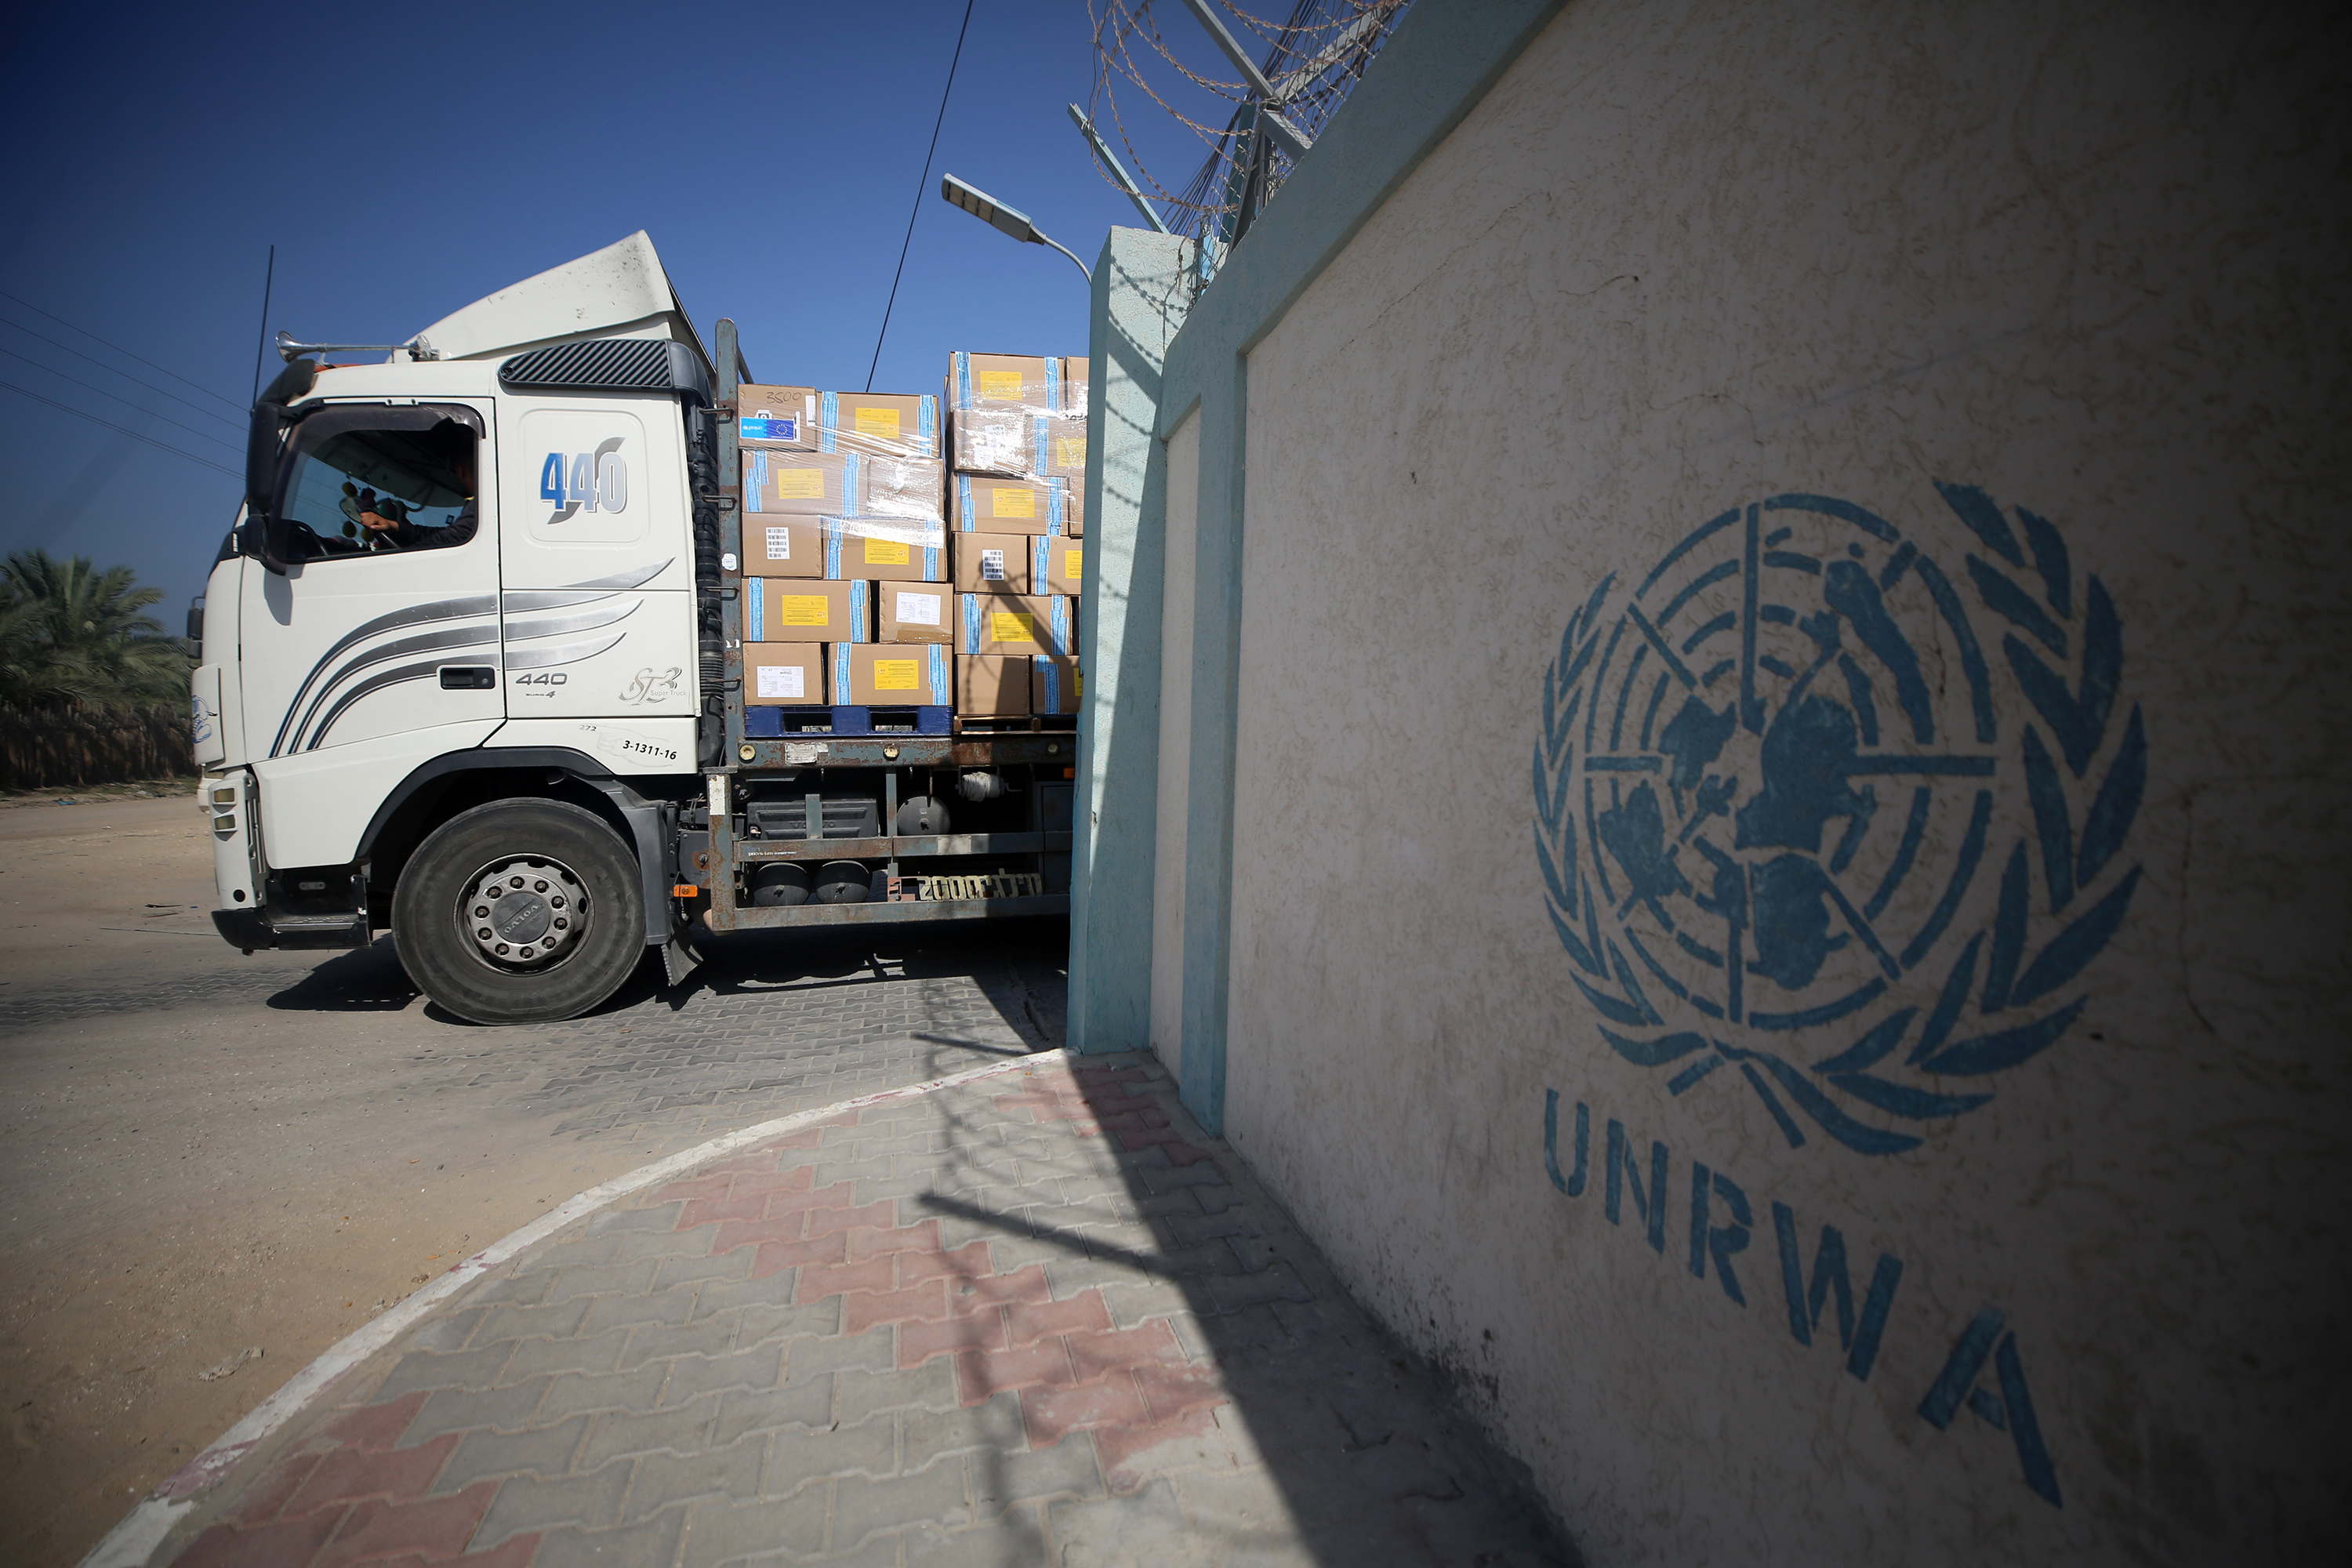 Workers of the United Nations Relief and Works Agency for Palestine Refugees (UNRWA) pack the medical aid and prepare it for distribution to hospitals at a warehouse in Deir Al-Balah, Gaza on October 25.